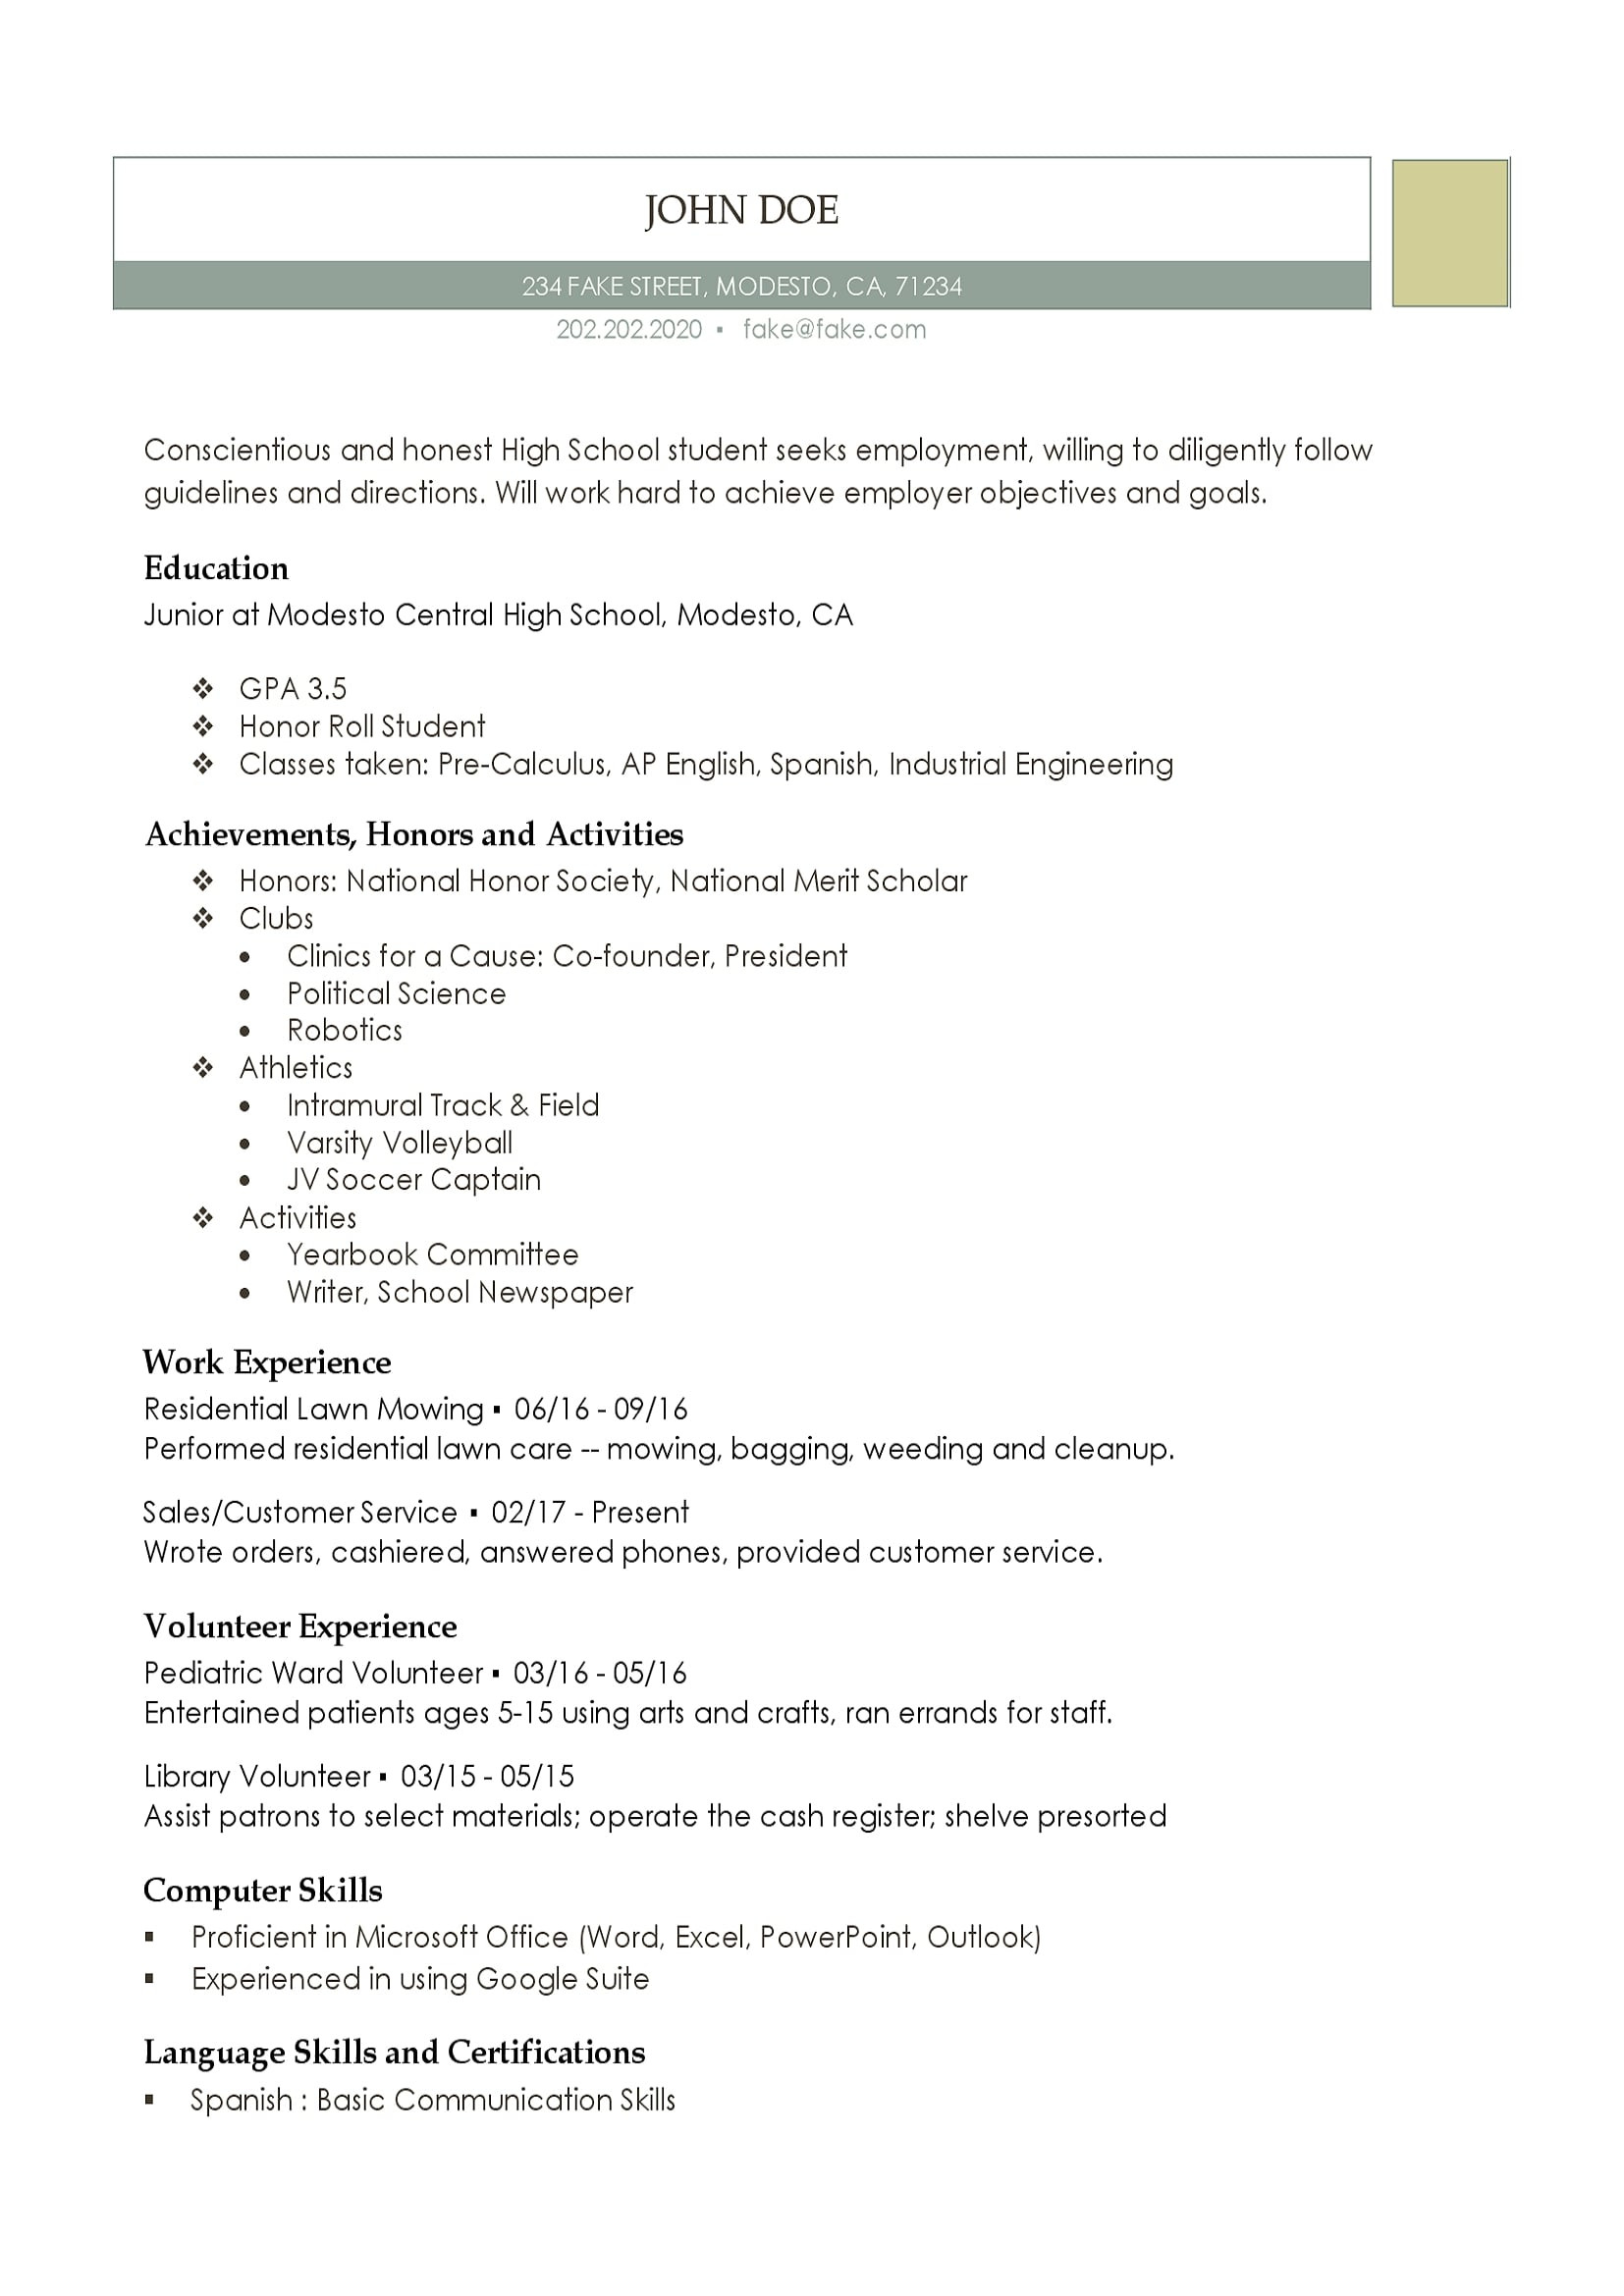 Fill In the Blank Resume Template for Highschool Students High School Resume – Resume Templates for High School Students and …